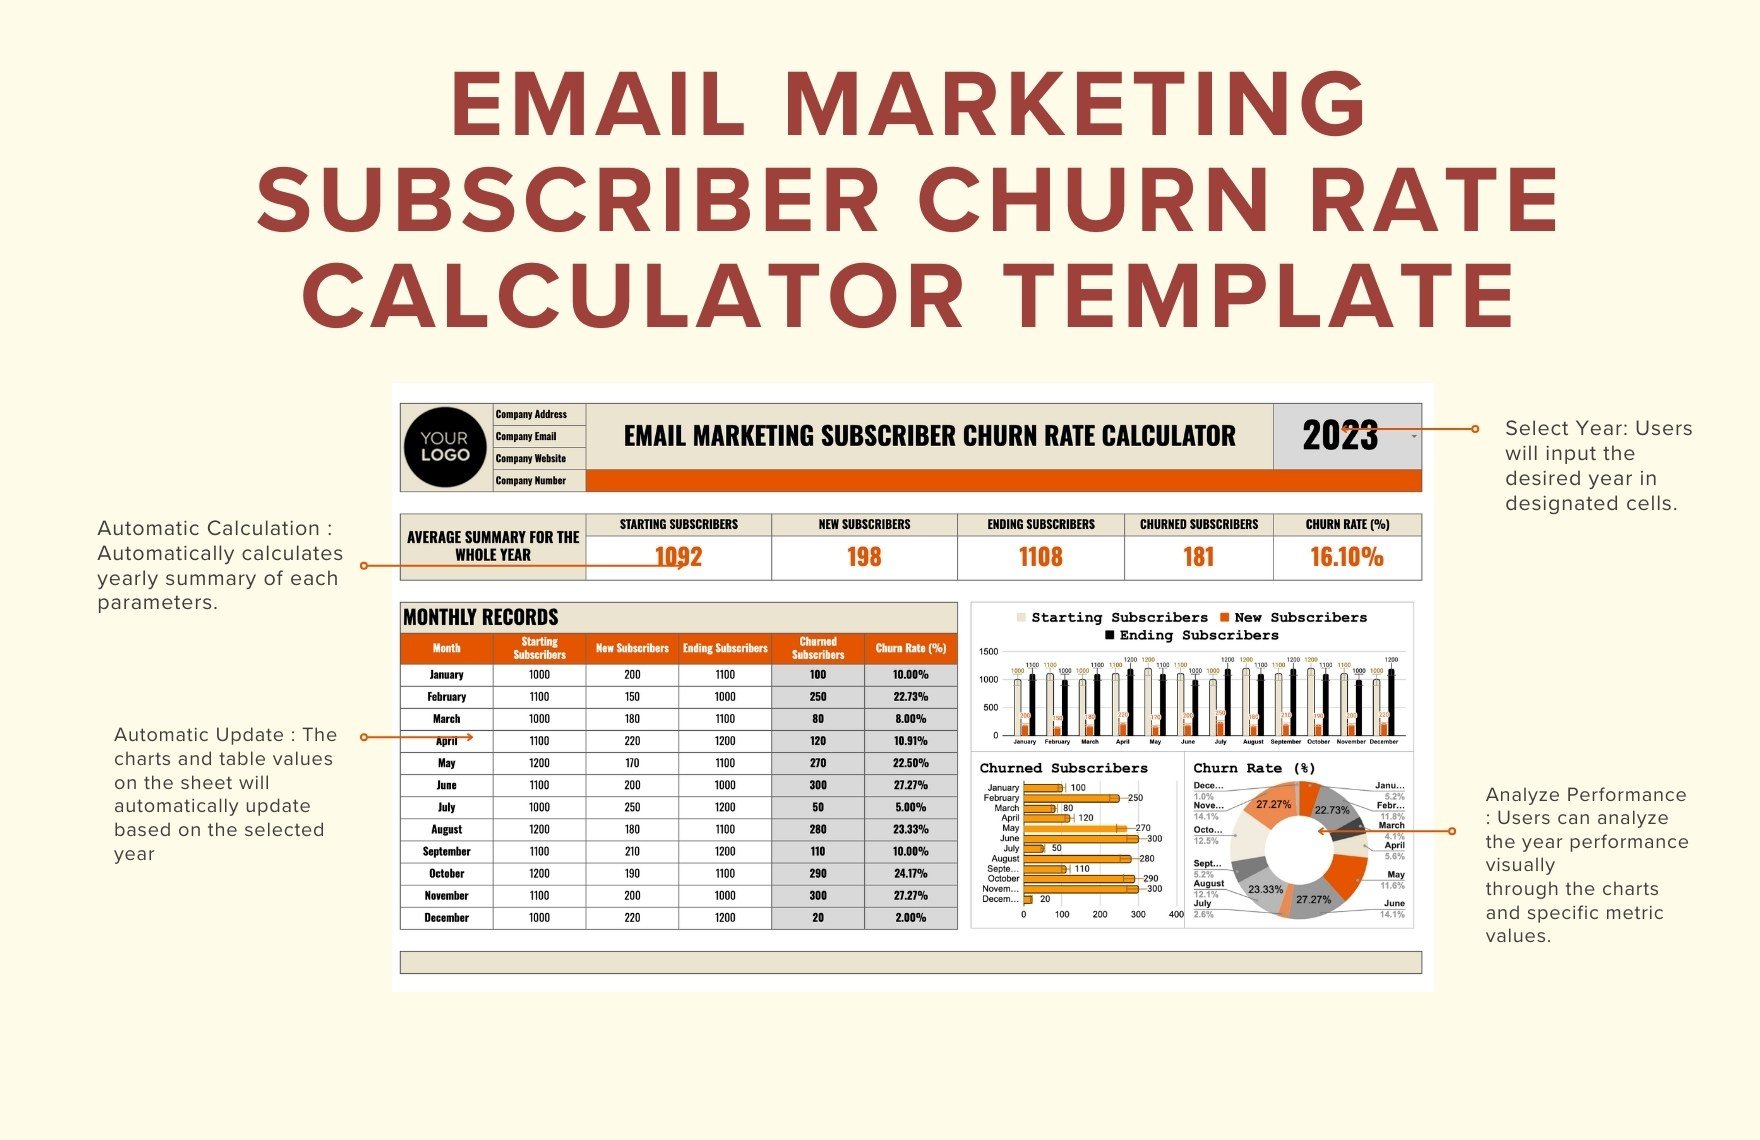 Email Marketing Subscriber Churn Rate Calculator Template